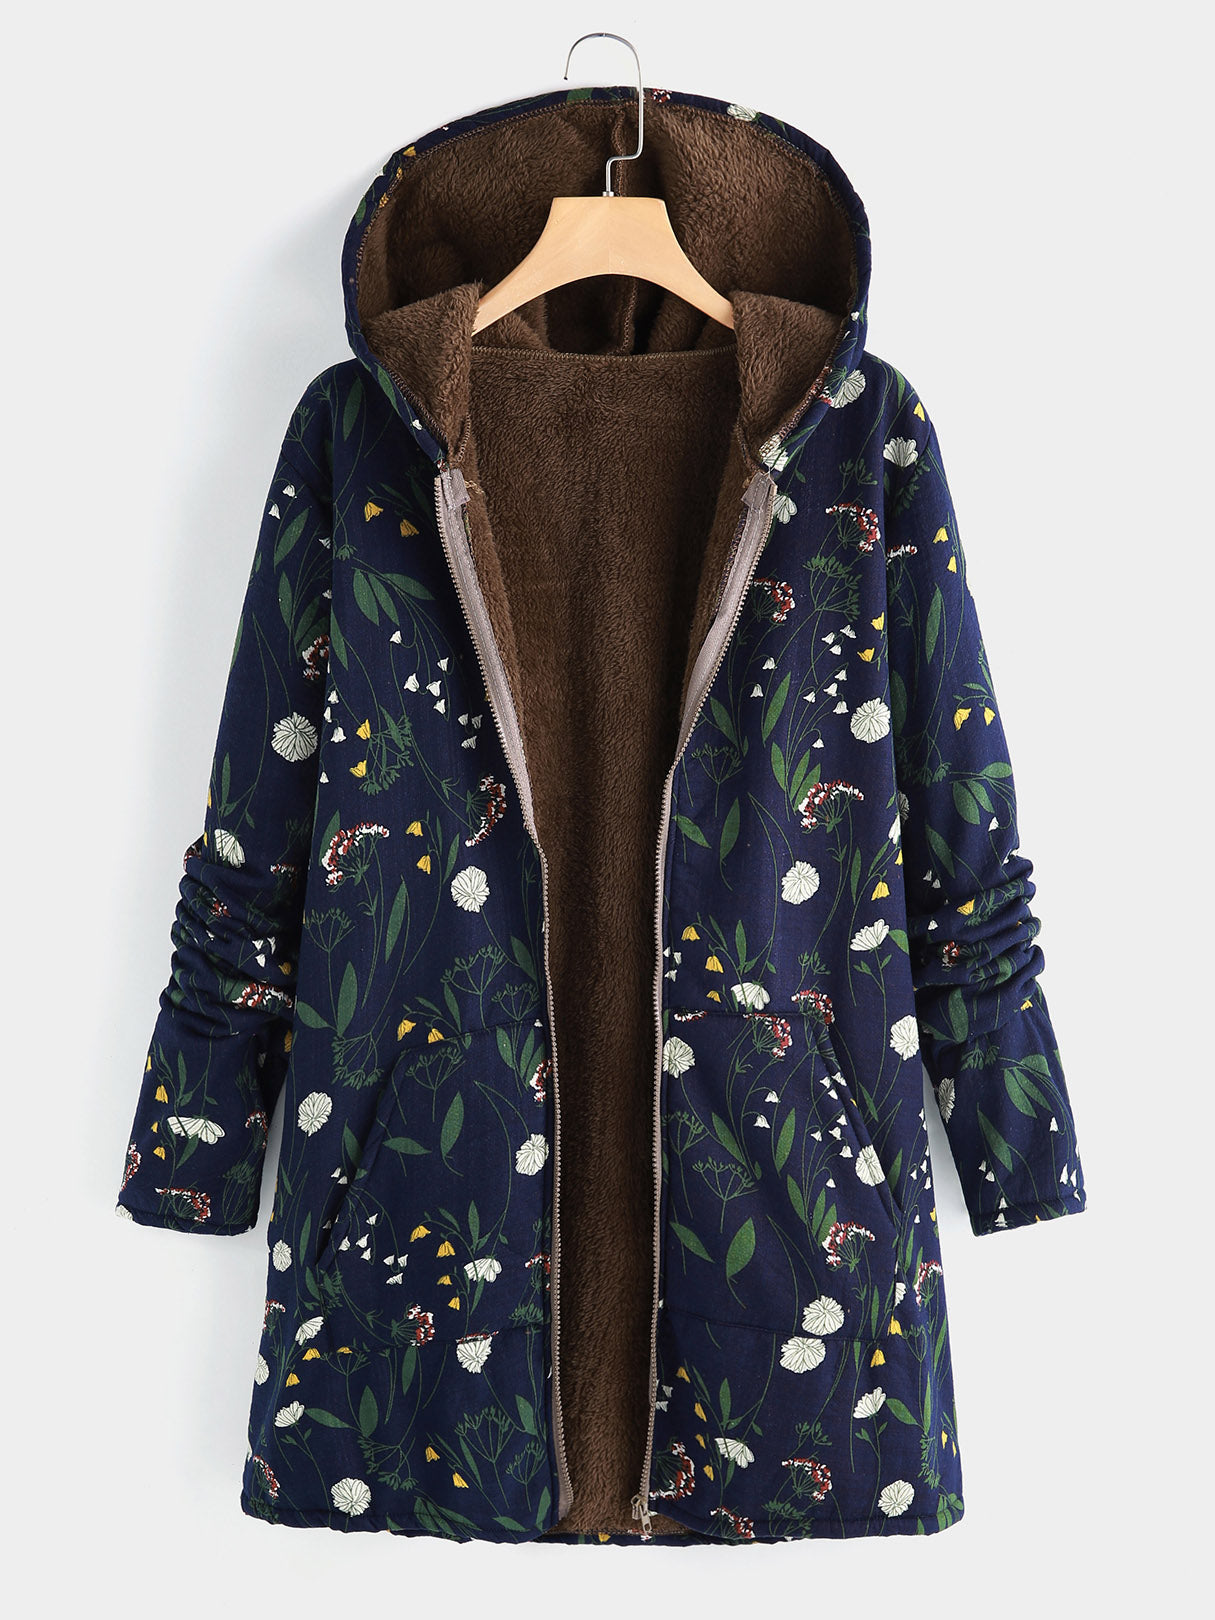 Wholesale Floral Print Side Pockets Hooded Long Sleeve Plus Size Coats & Jackets